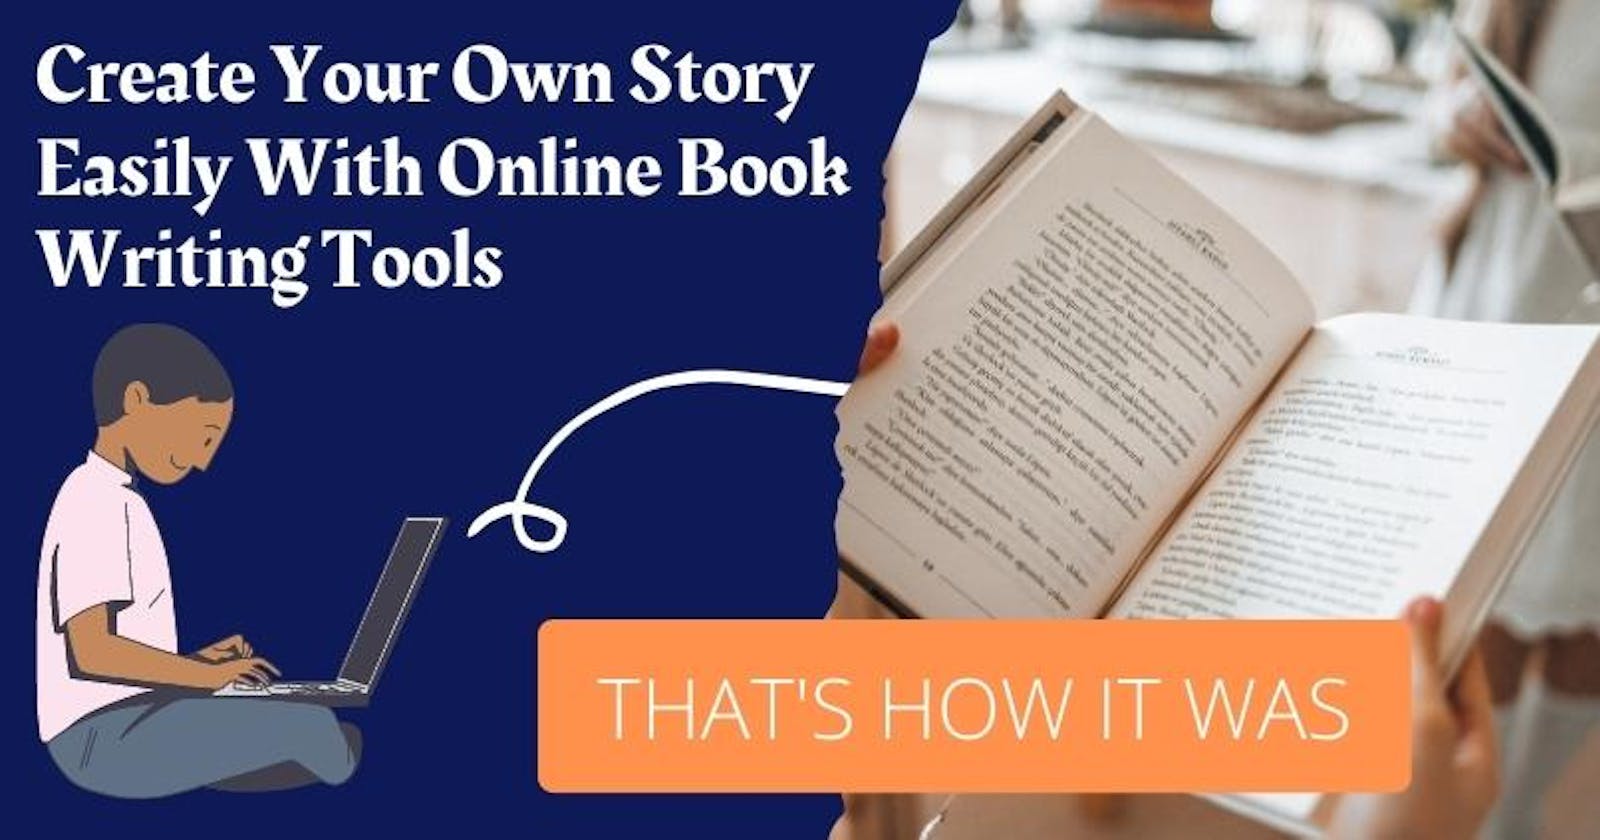 Create Your Own Story Easily With Online Book Writing Tools